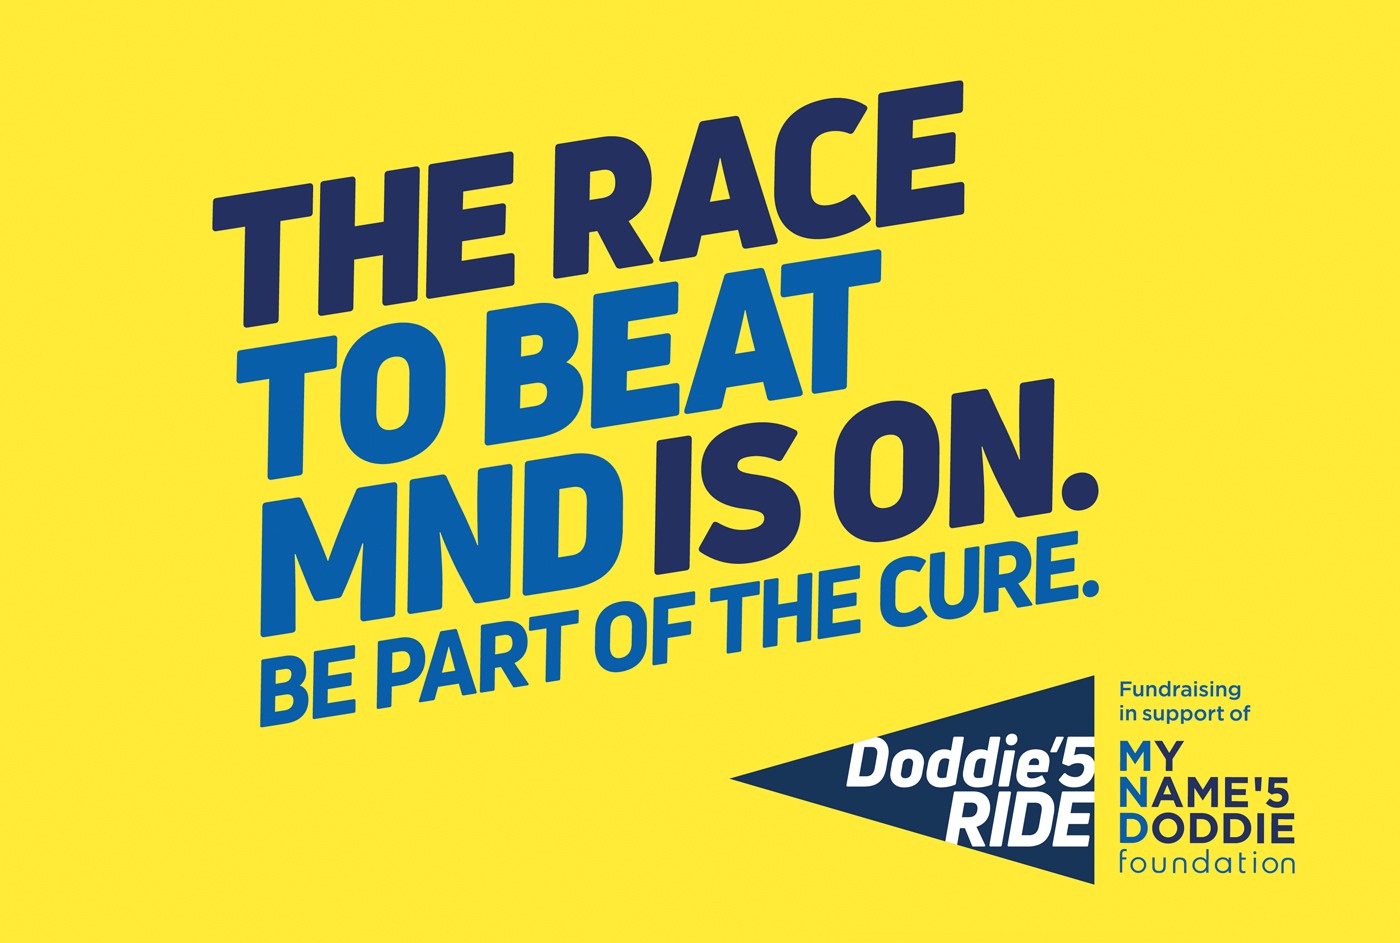 The race to beat MND is on. Be part of the cure.